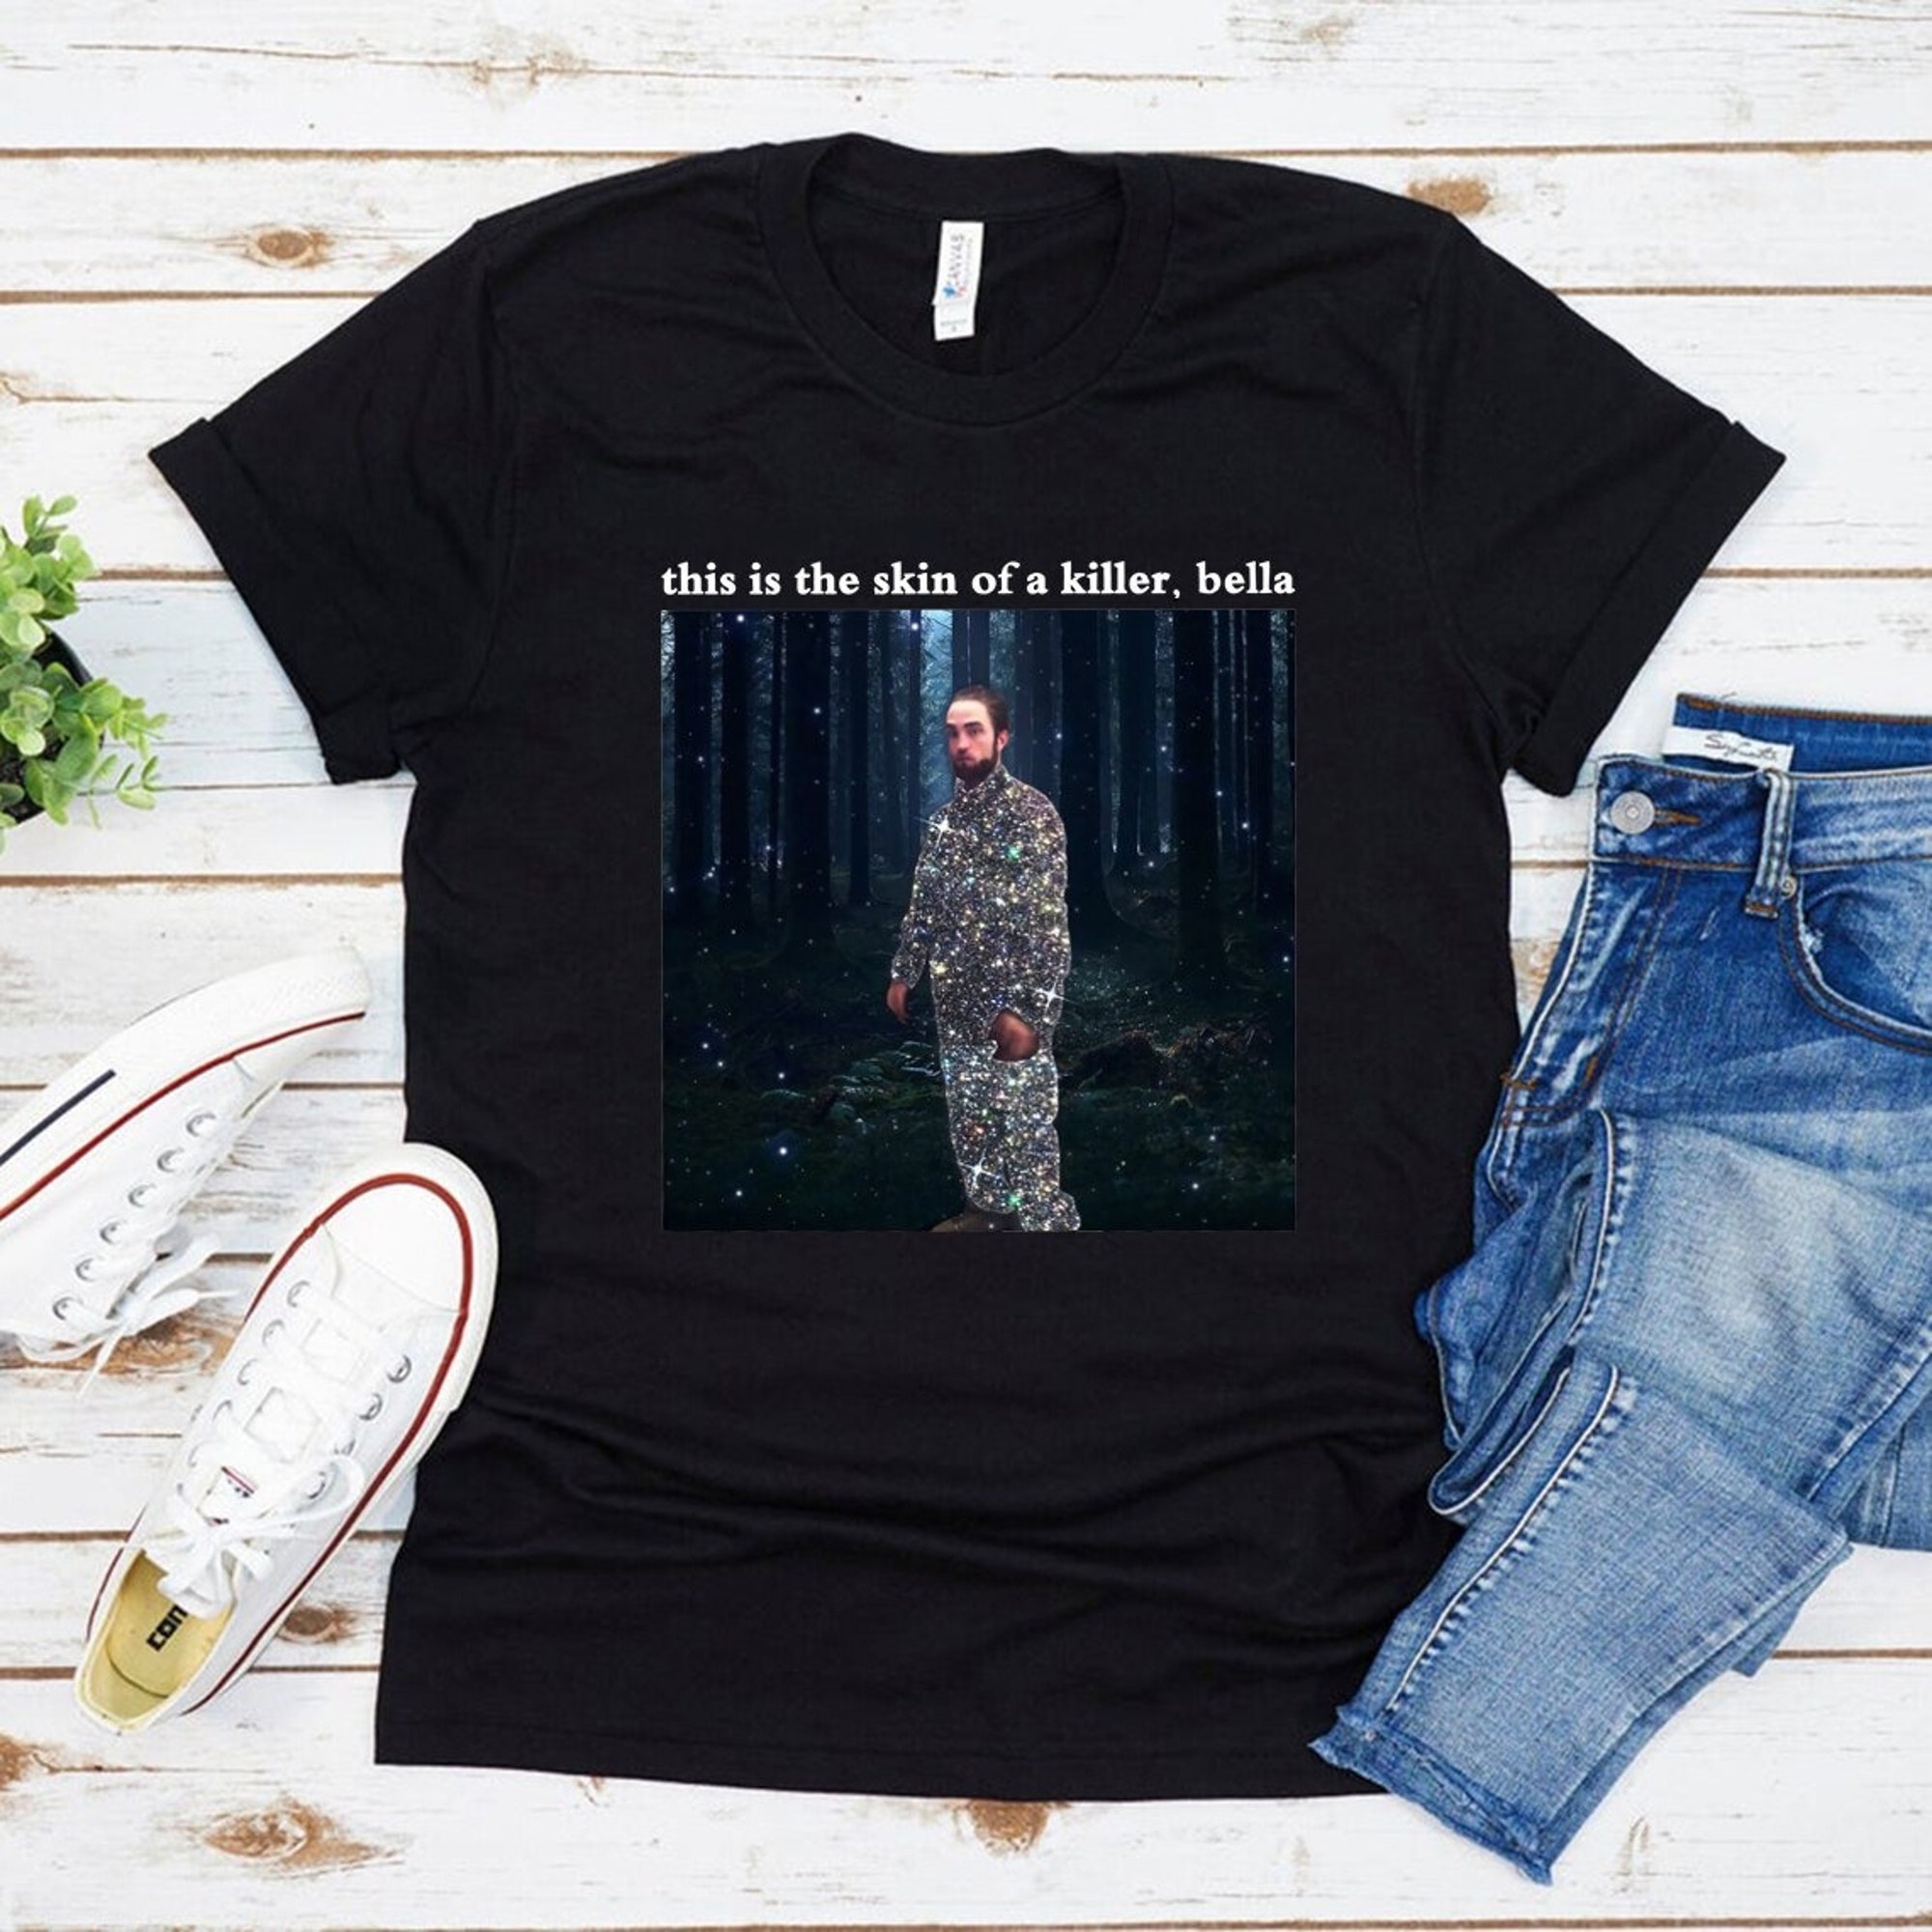 Discover Lustiges Robert Pattinson Shirt, Twilight Shirt, This Is The Skin Of A Killer Bella